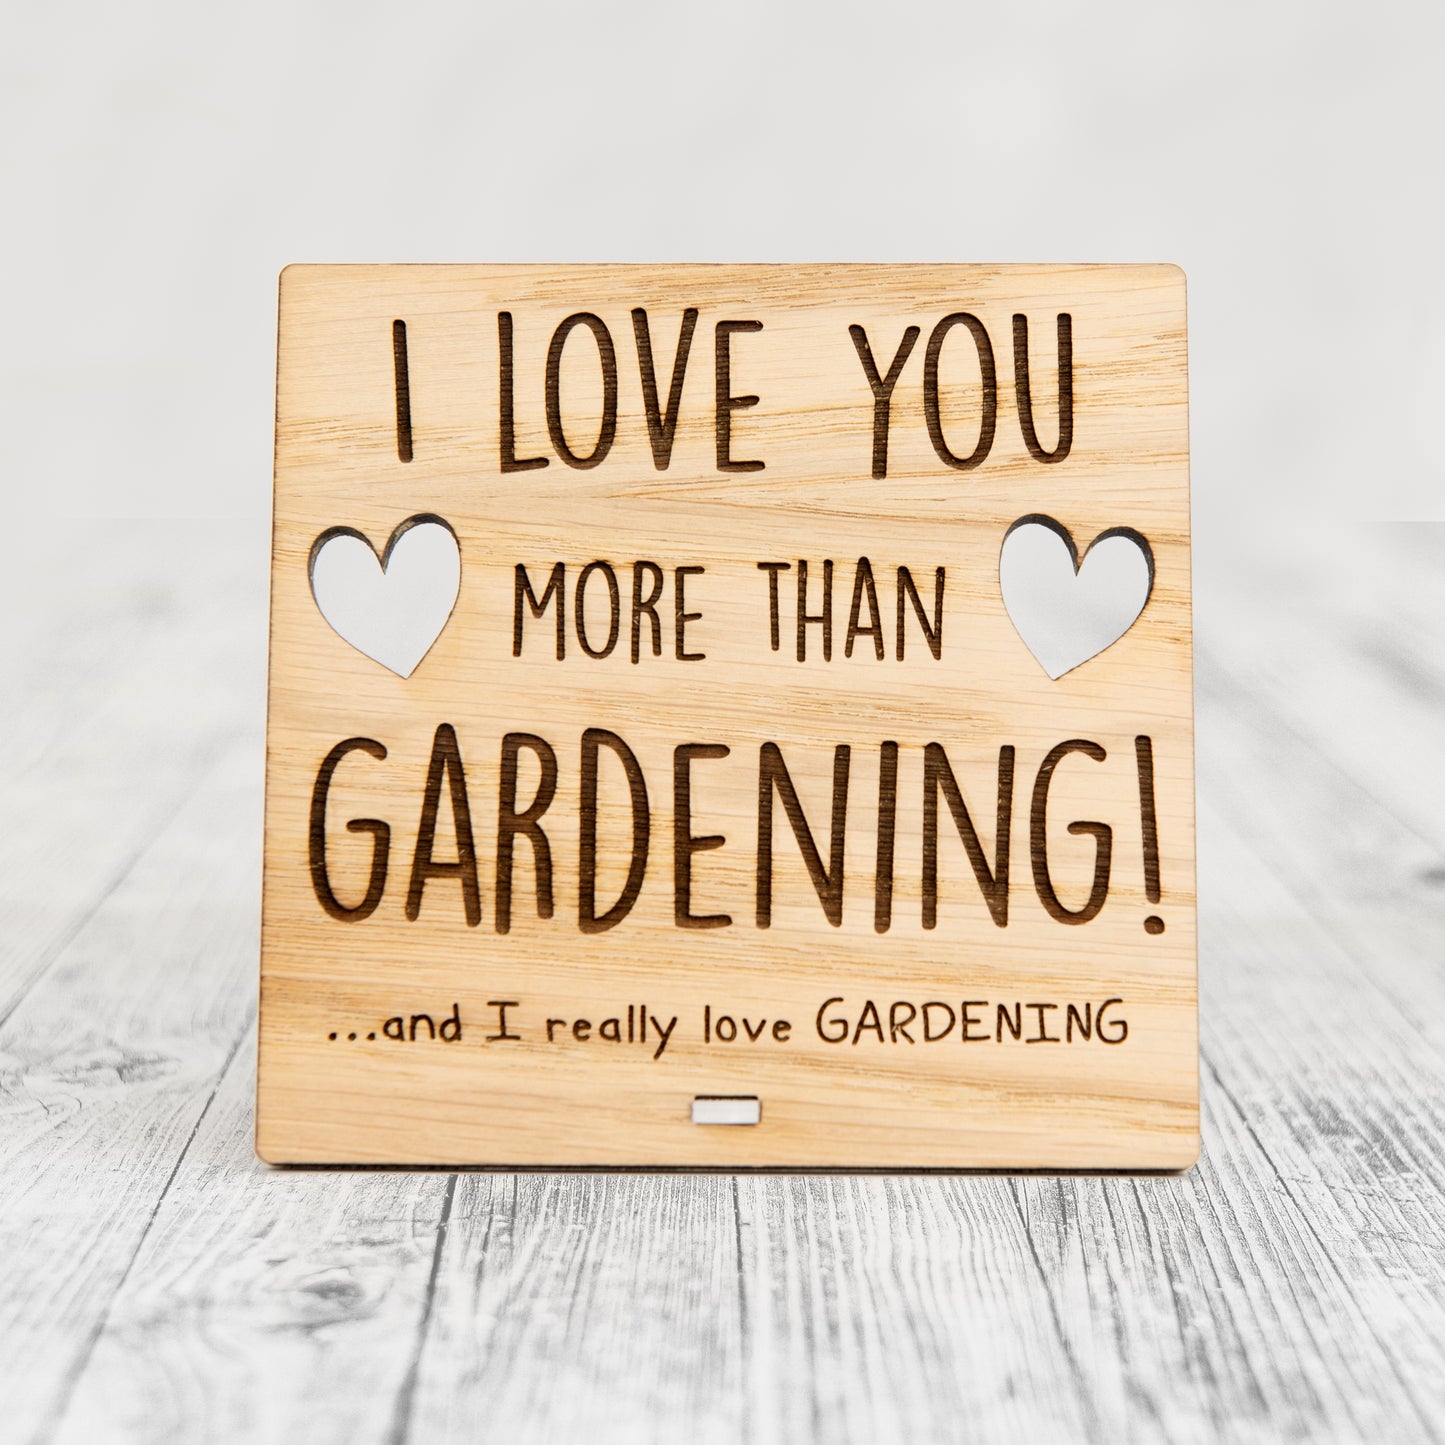 I Love You More Than GARDENING - Wooden Valentine's Day Plaque